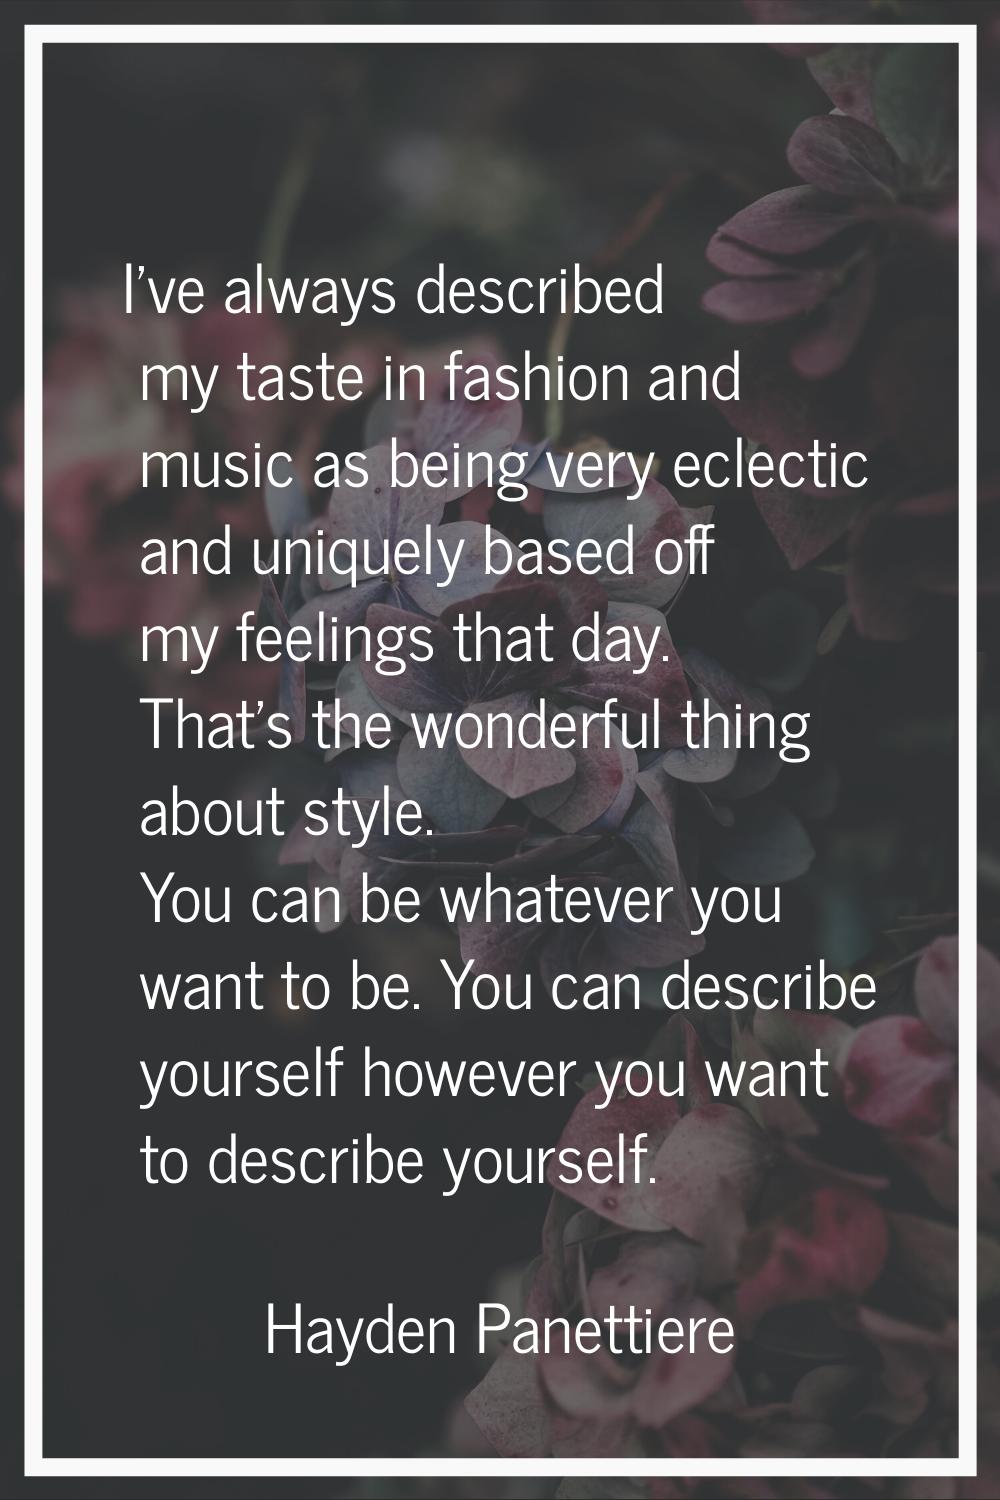 I've always described my taste in fashion and music as being very eclectic and uniquely based off m